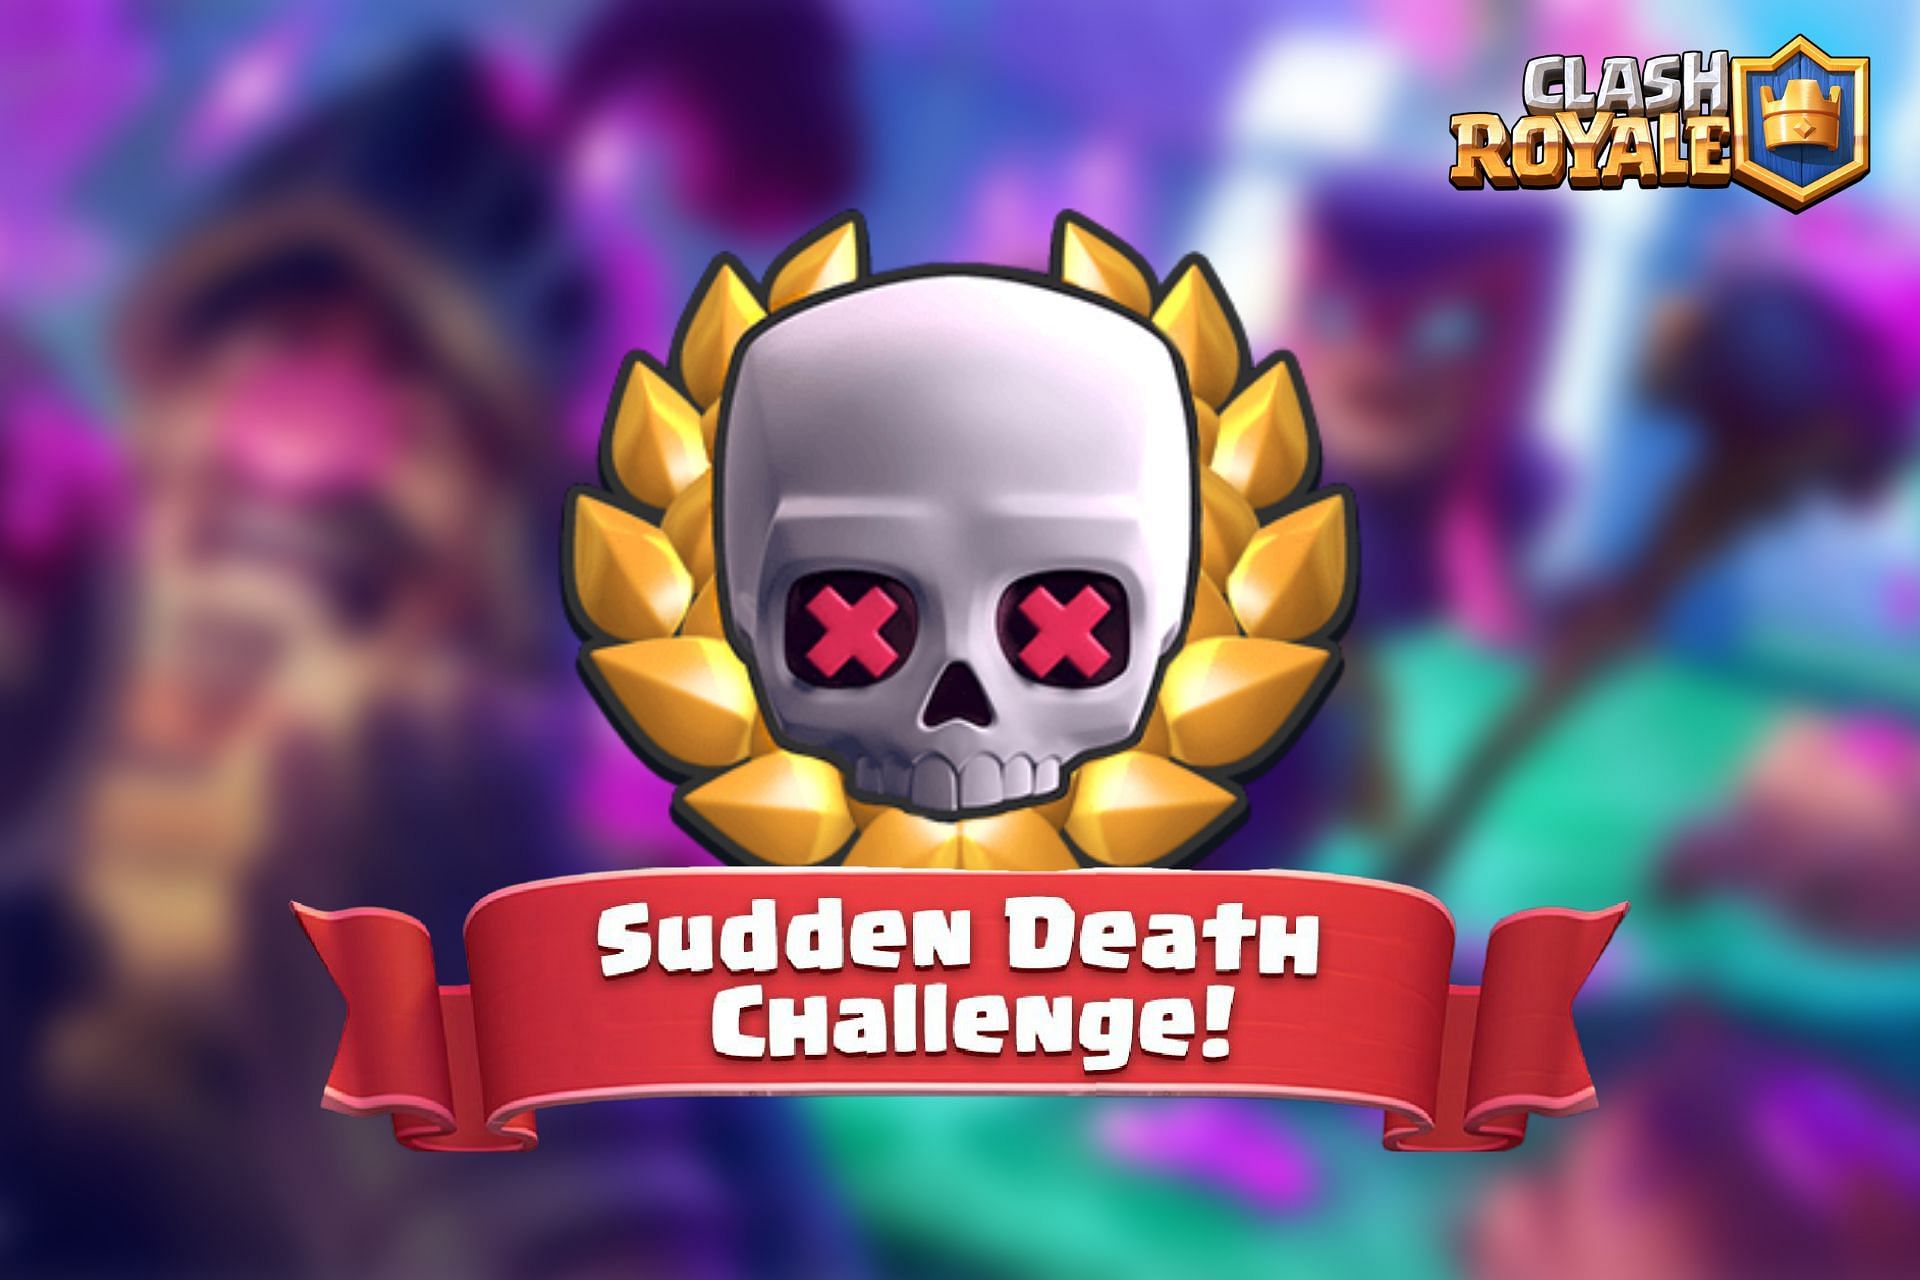 Discussing the Sudden Death challenge in Clash Royale (Image via Sportskeeda)